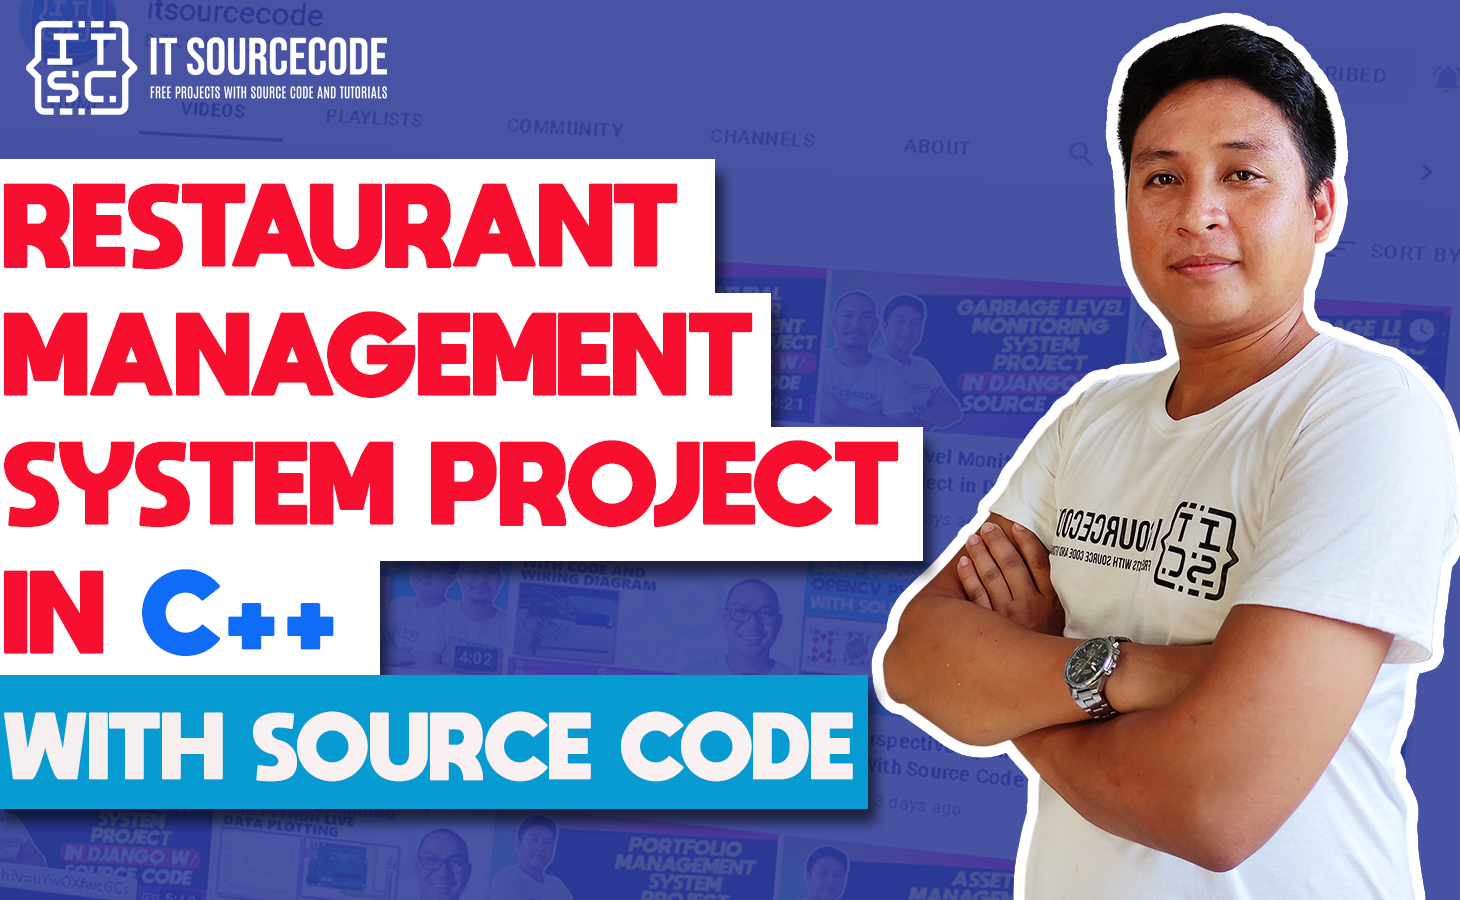 Restaurant Management System Project in C++ with Source Code